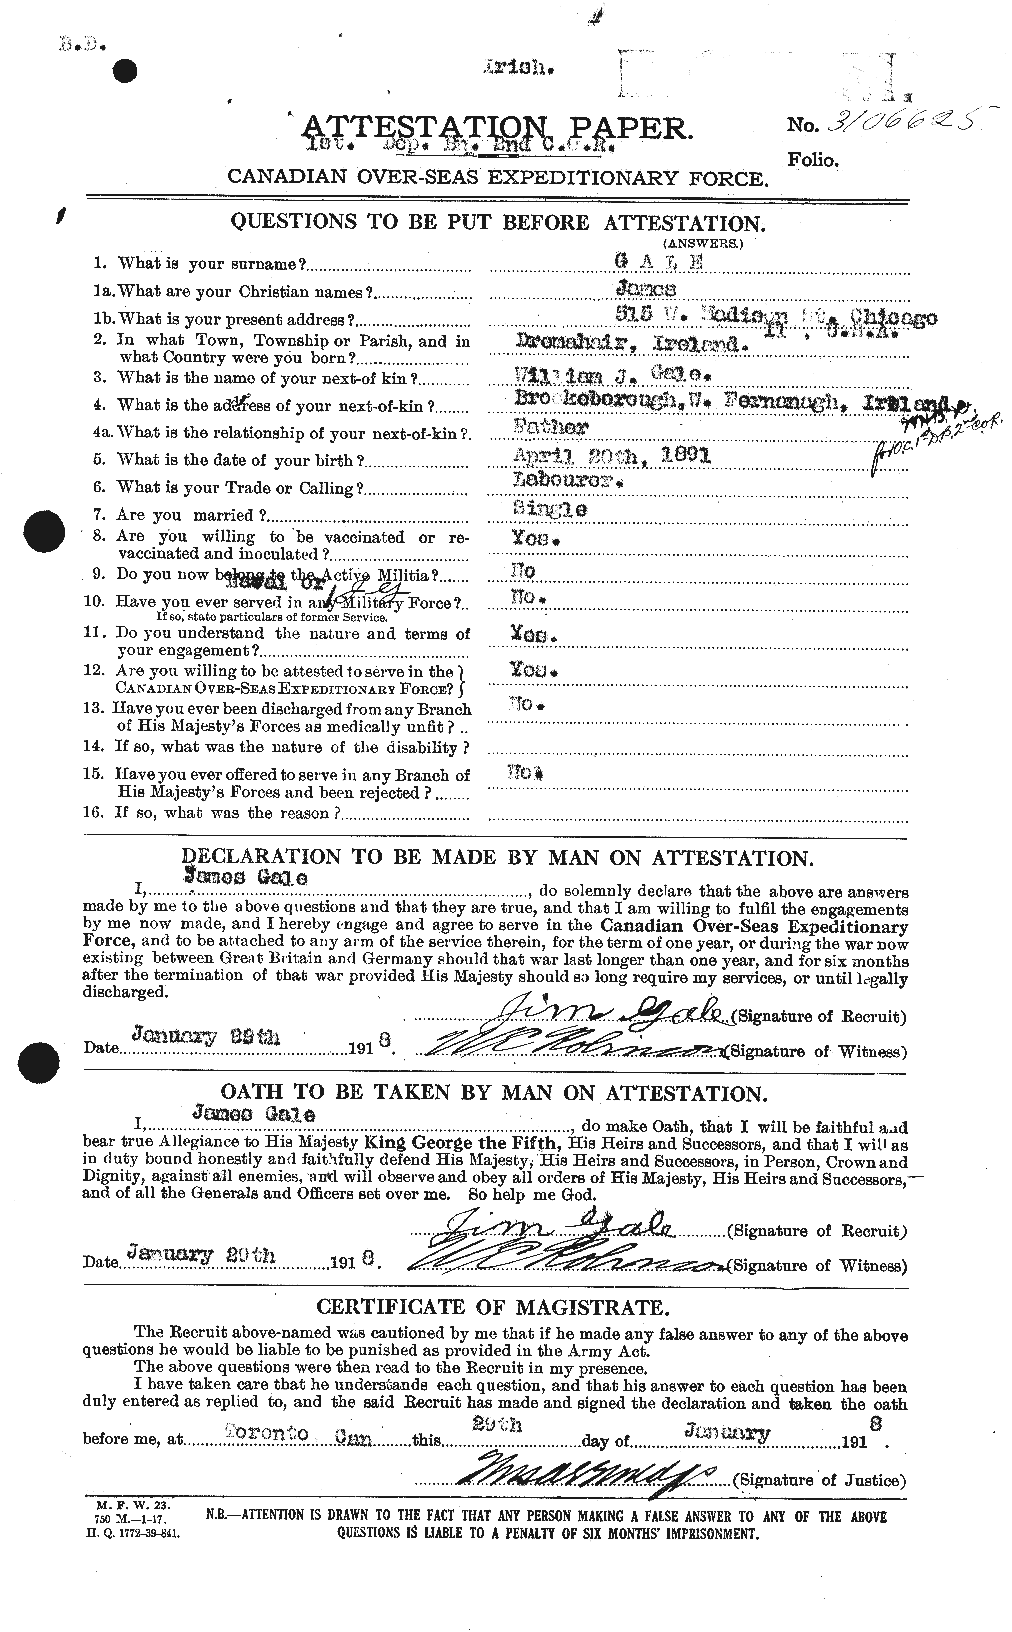 Personnel Records of the First World War - CEF 345379a